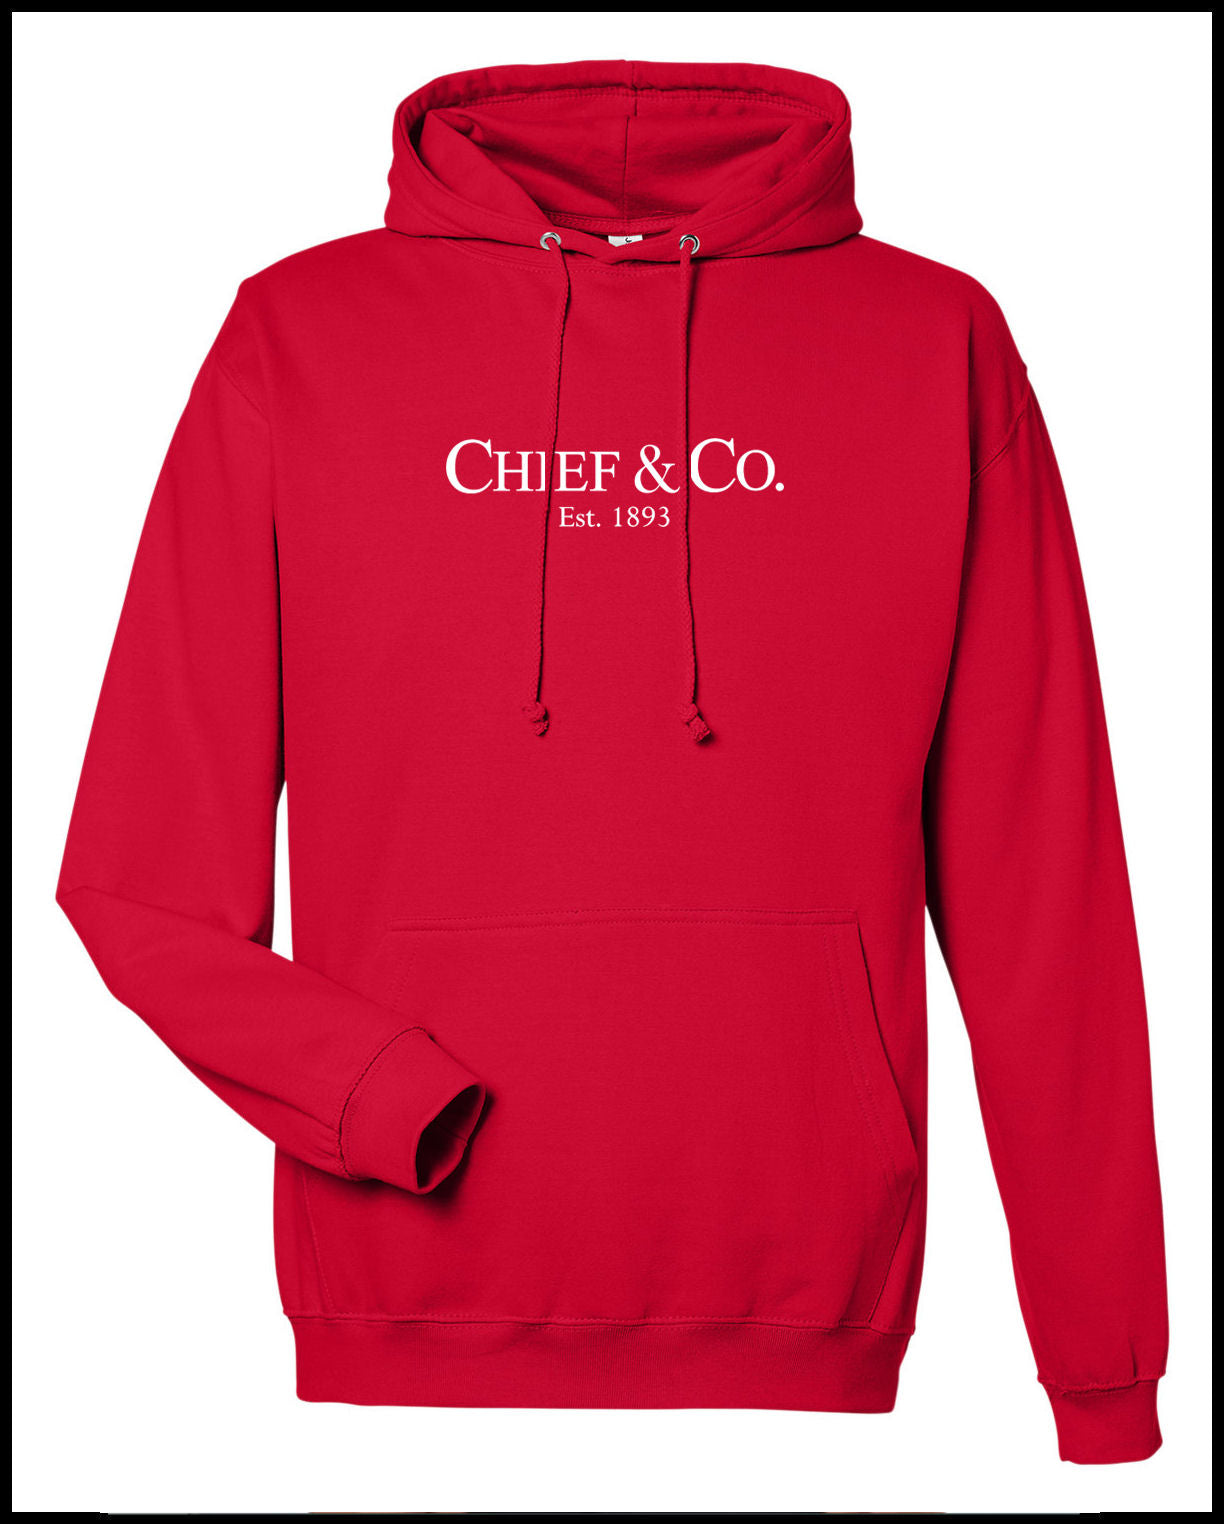 Chief & Co. Red & White Hooded Sweatshirt